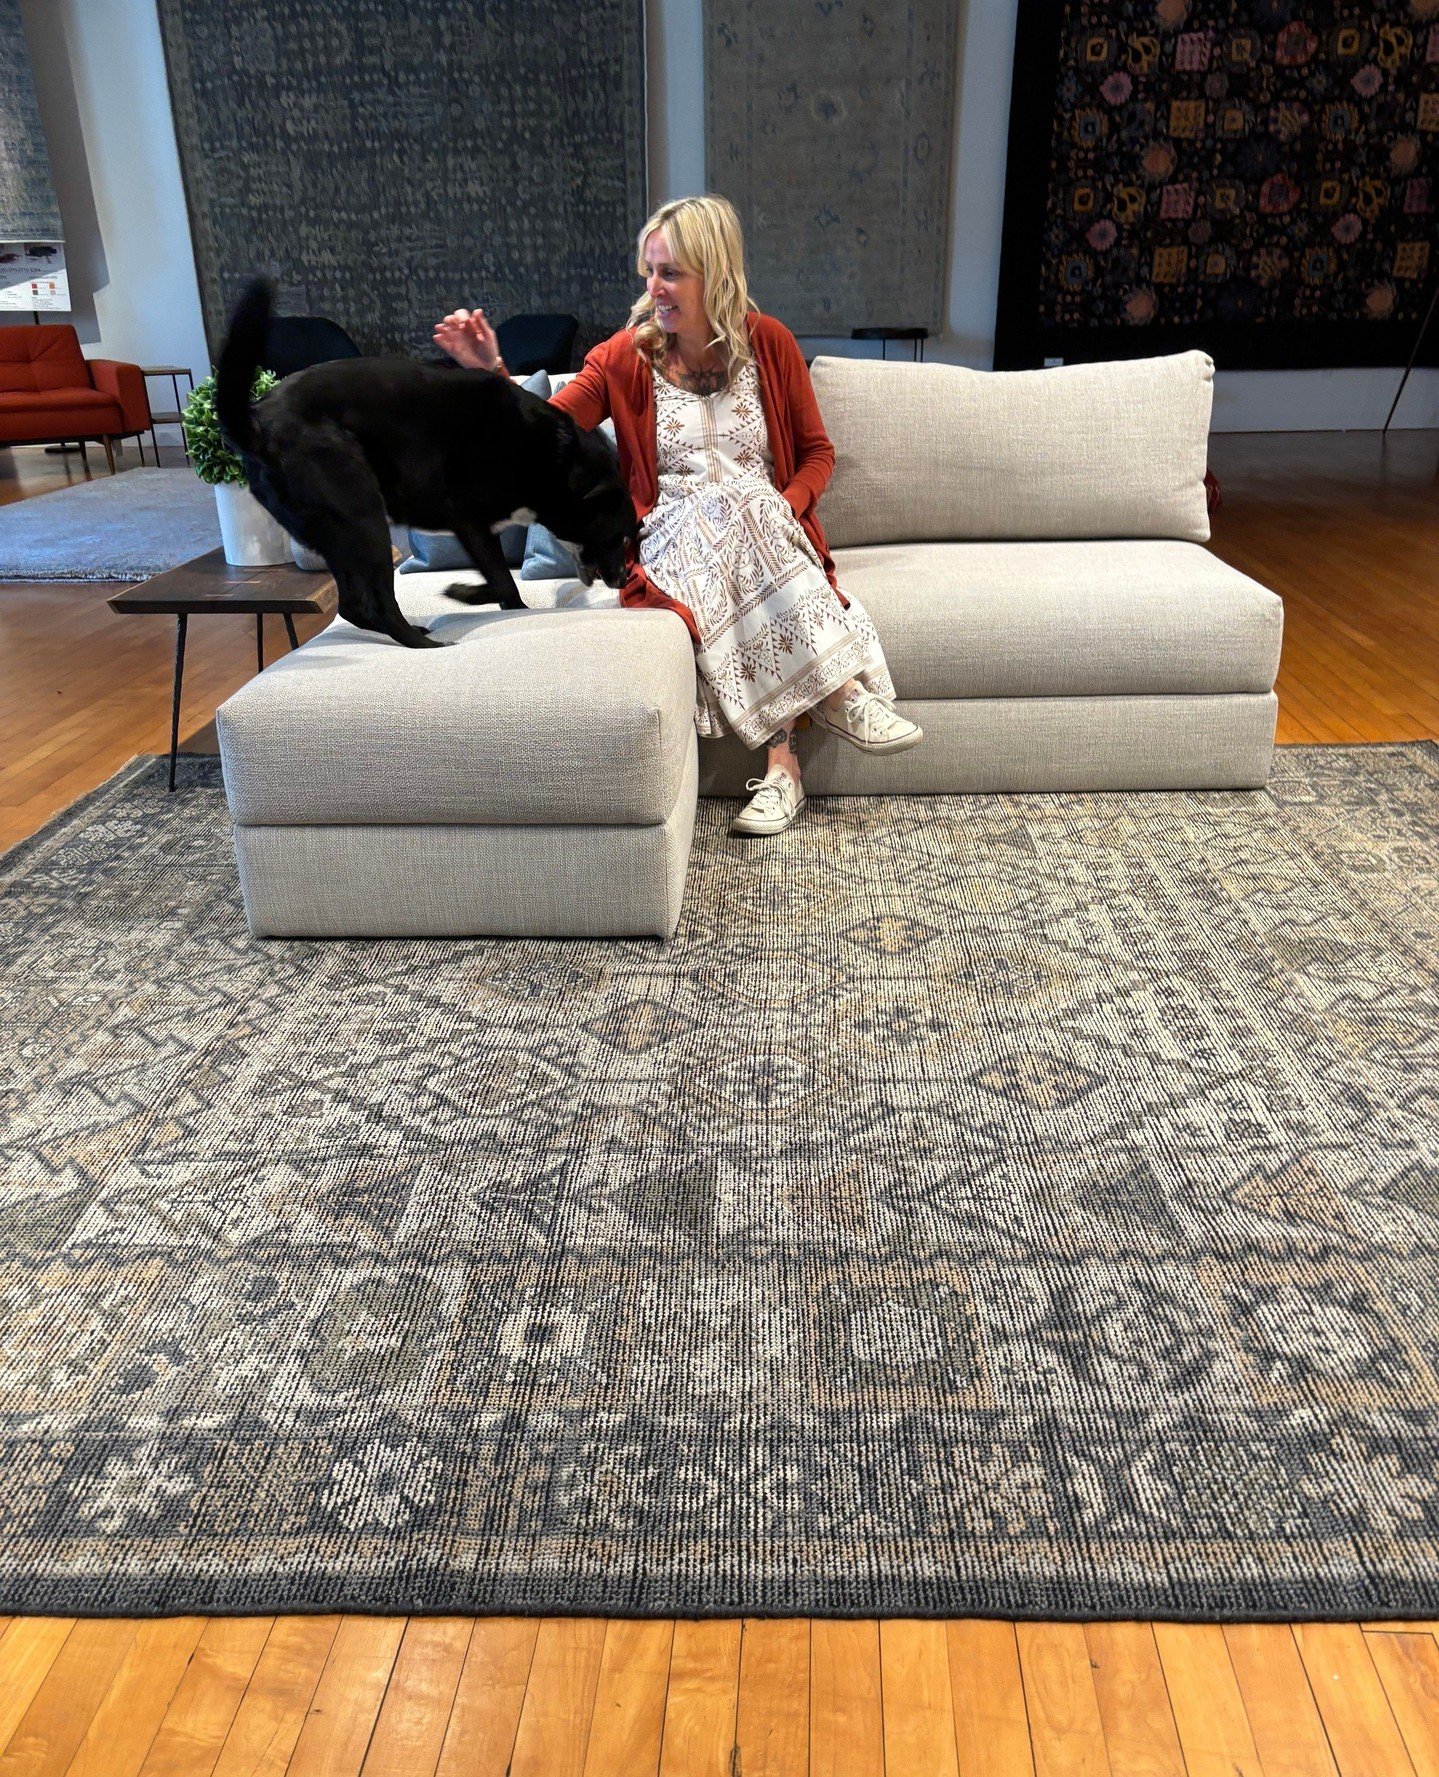 Surprise visit from @samanthablazer5 and Otis this weekend. ❤️ Otis agreed to sit for photos with our Heirloom rug collection. Next time we will be prepared with some treats. Thank you!⁠
⁠
Please visit us in our State College showroom.⁠ ⁠ ⁠
⁠
#shoplo